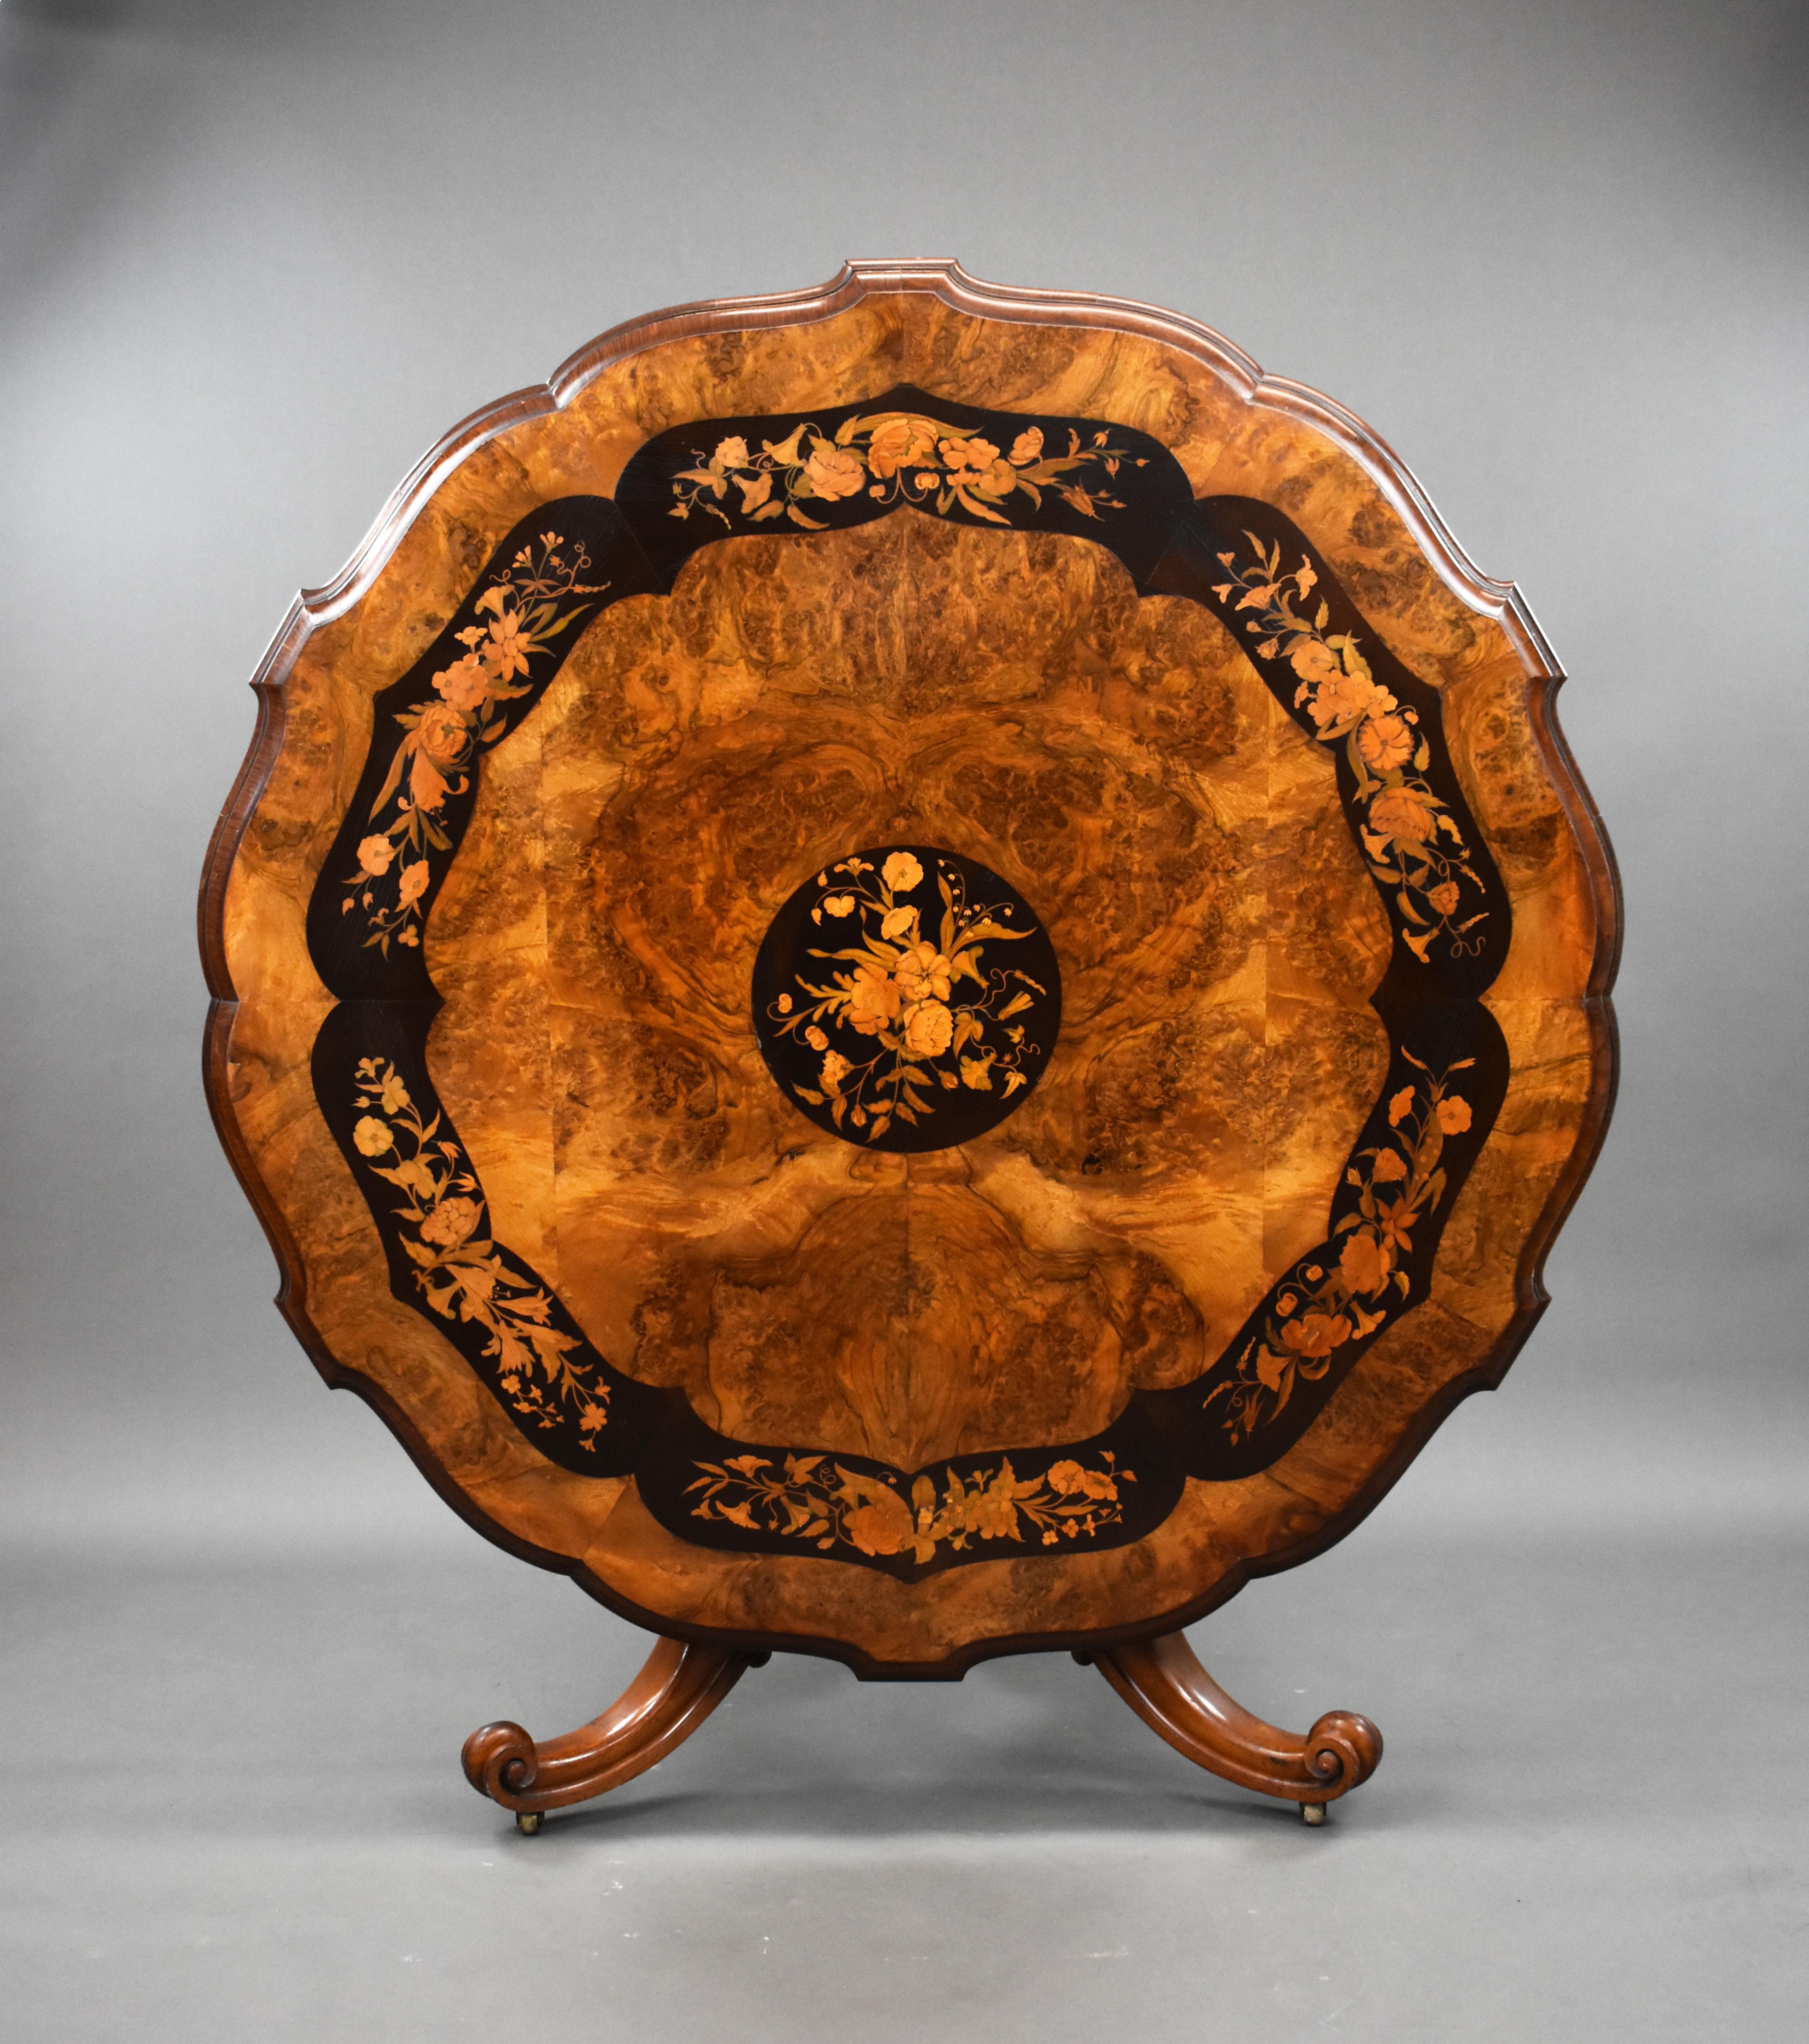 For sale is a top quality Victorian burr walnut and marquetry centre table. The table top is ornately shaped and decorated with very fine floral marquetry inlay. This is above a marquetry inlaid base, standing on three shaped and carved legs